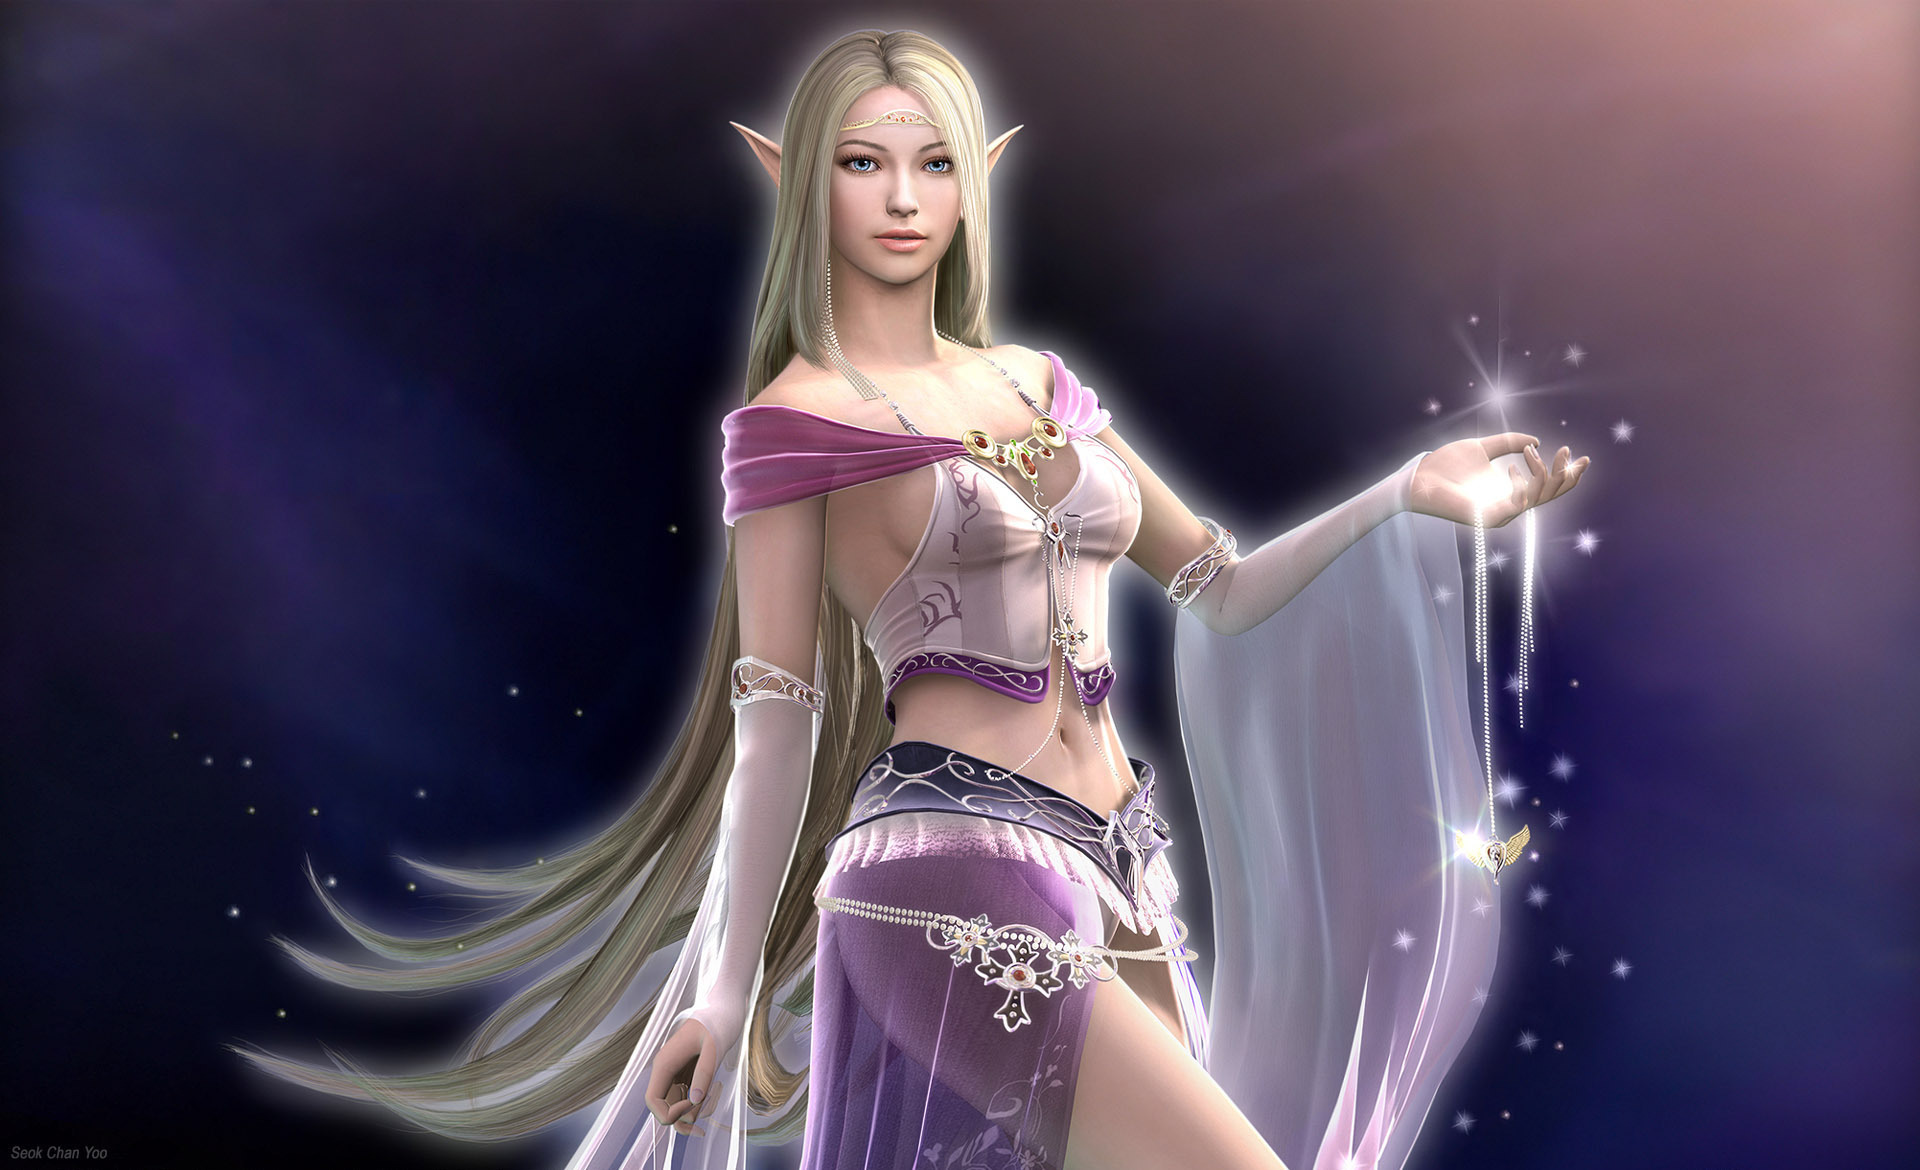 Elf woman fantasy Lady girl fictional character Art image Download all 4k  wallpaper images for your desktop background 3840x2160  Wallpapers13com